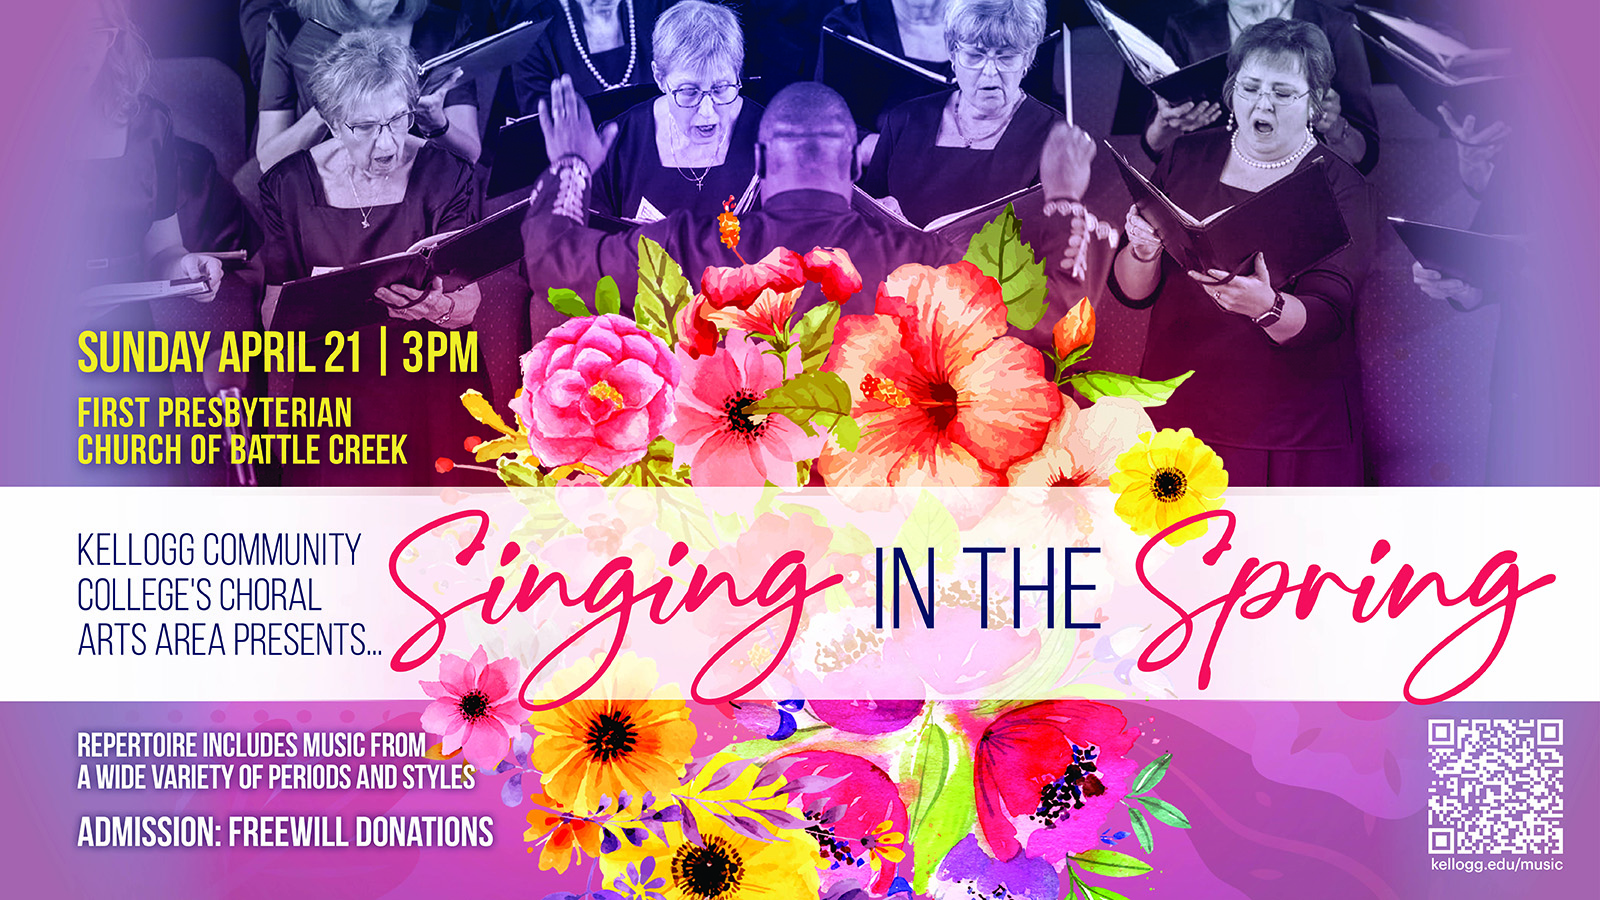 A graphic text slide showing flowers and text that reads, "Singing in the Spring. 3 p.m. Sunday, April 21. First Presbyterian Church of Battle Creek."